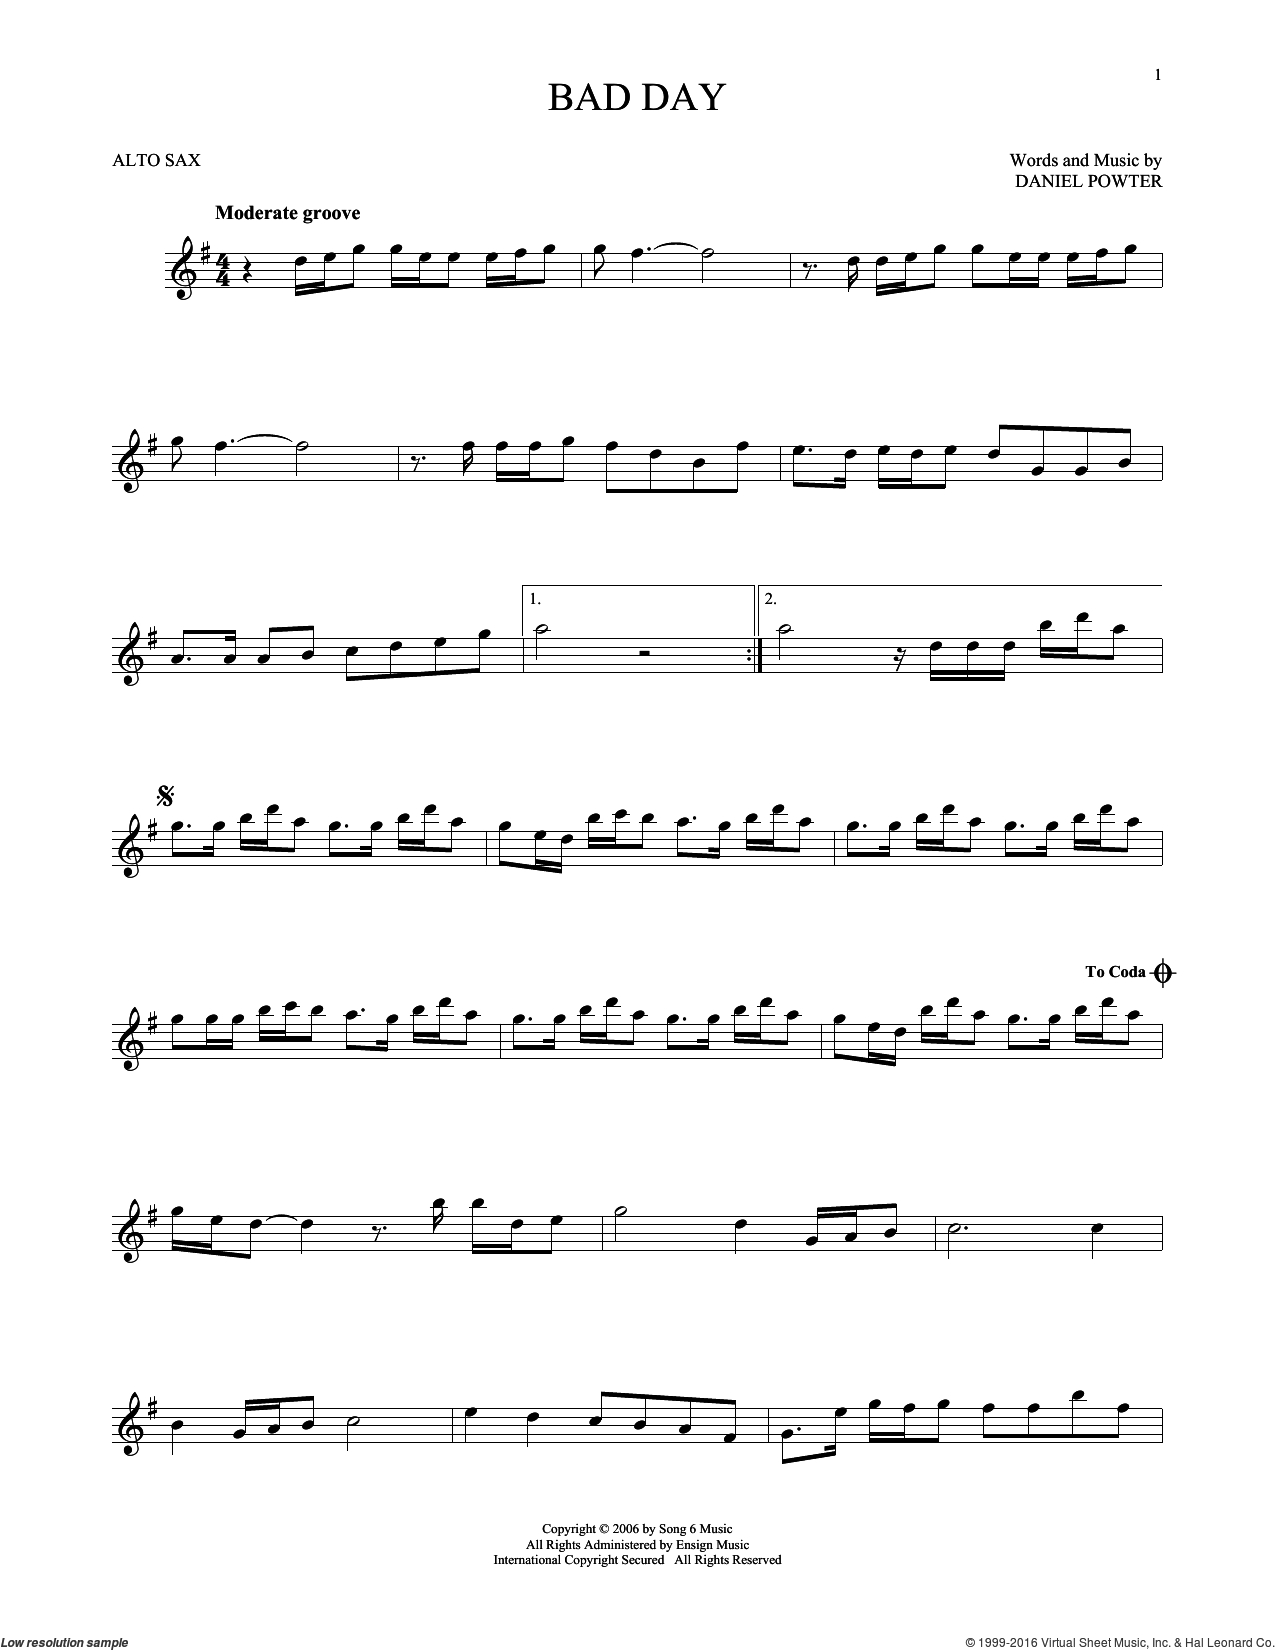 Powter - Bad Day Sheet Music For Alto Saxophone Solo [Pdf] In 2019 - Bad Day Piano Sheet Music Free Printable